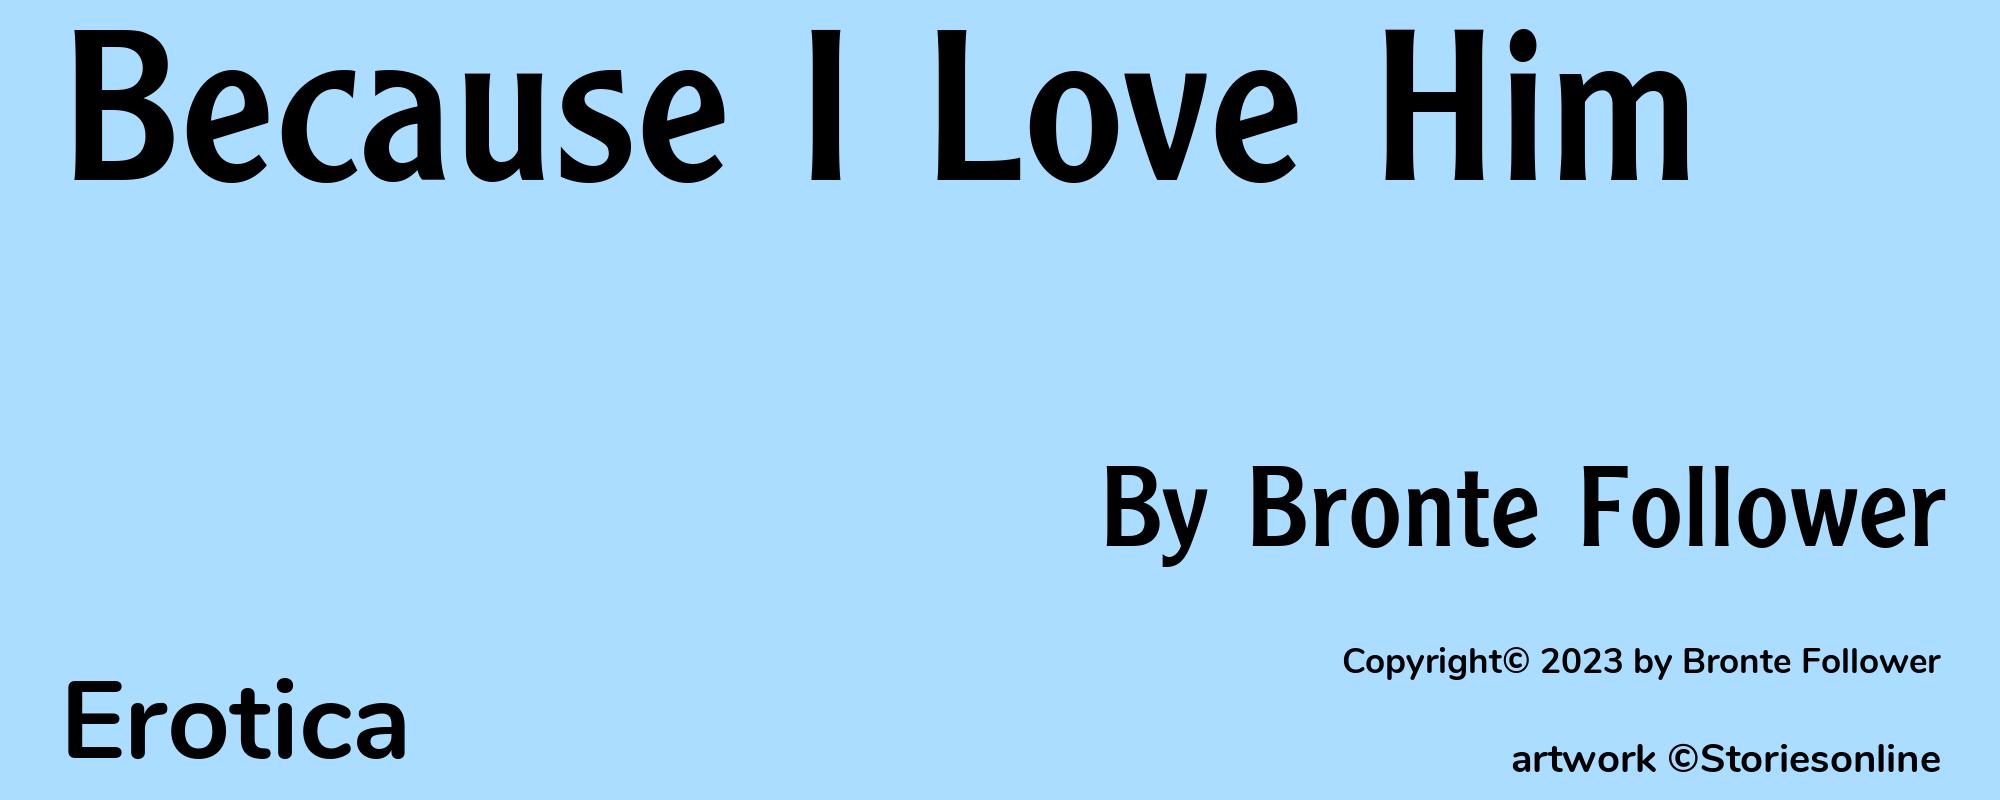 Because I Love Him - Cover